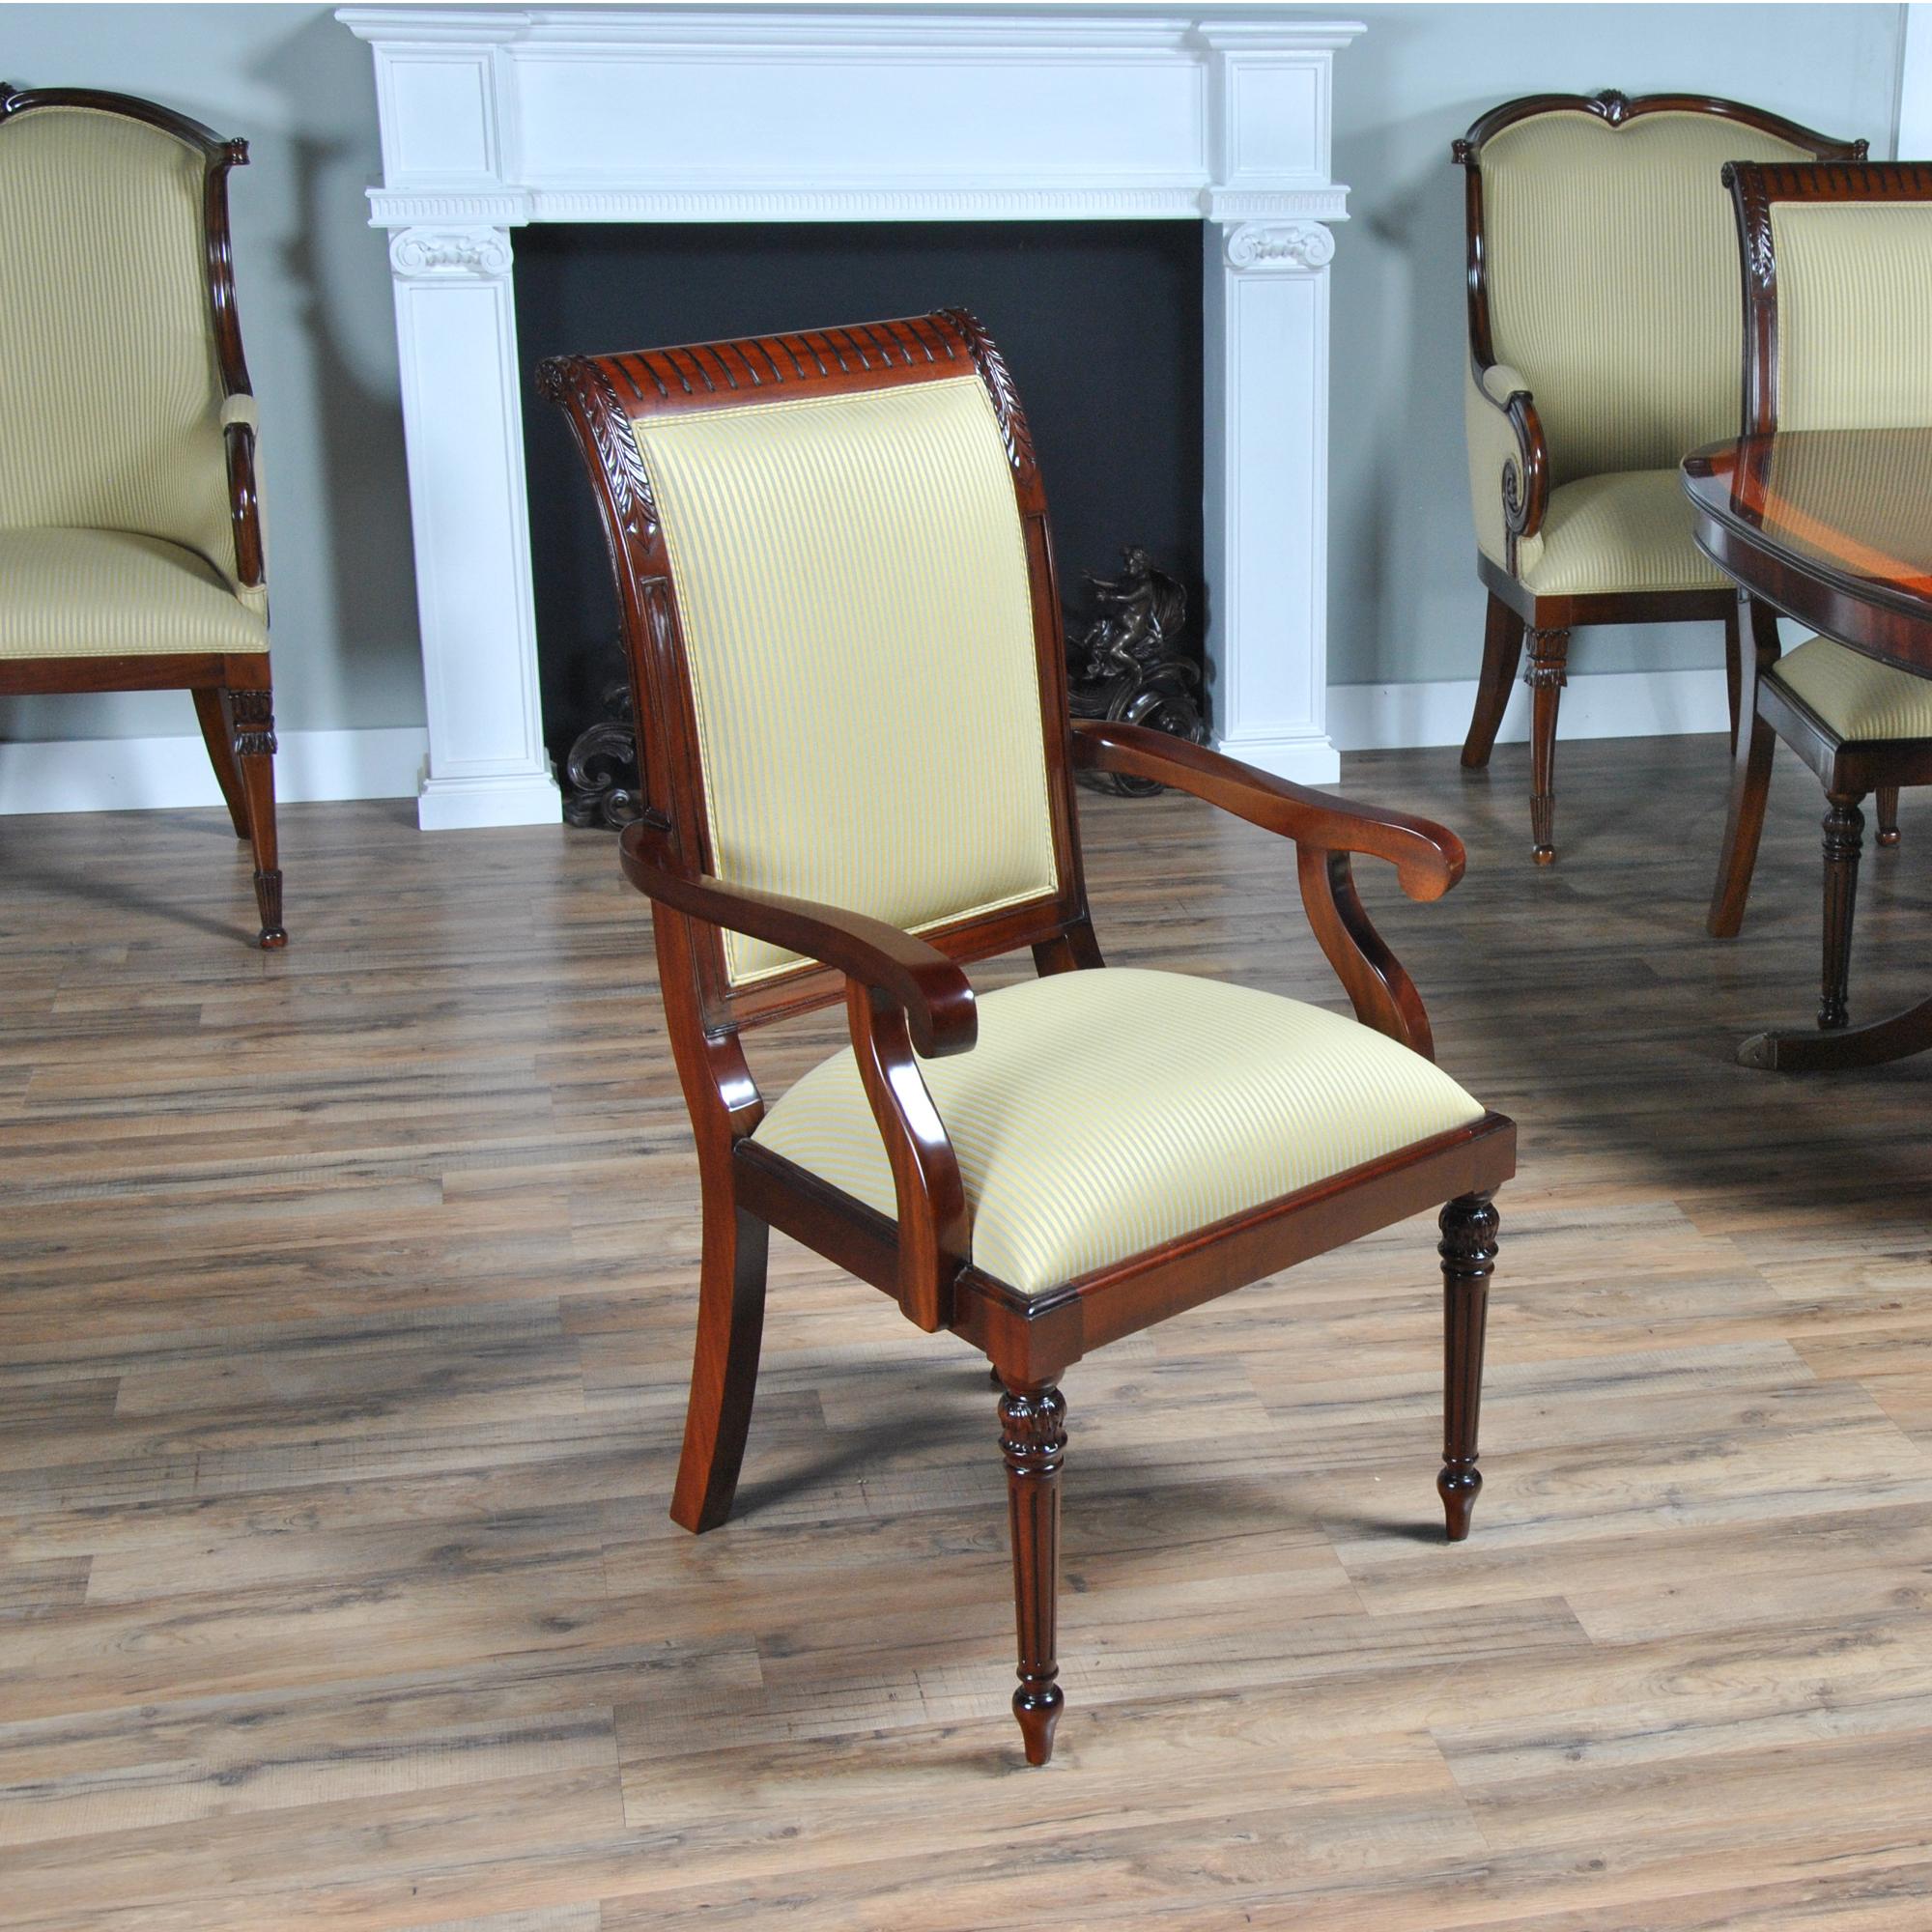 The set of Tall Back Upholstered Chairs consists of 2 arm chairs and 8 matching side chairs. The chairs in this set are both finely detailed and deceptively simple in appearance. If that is the type of chair you are seeking then invite this set home